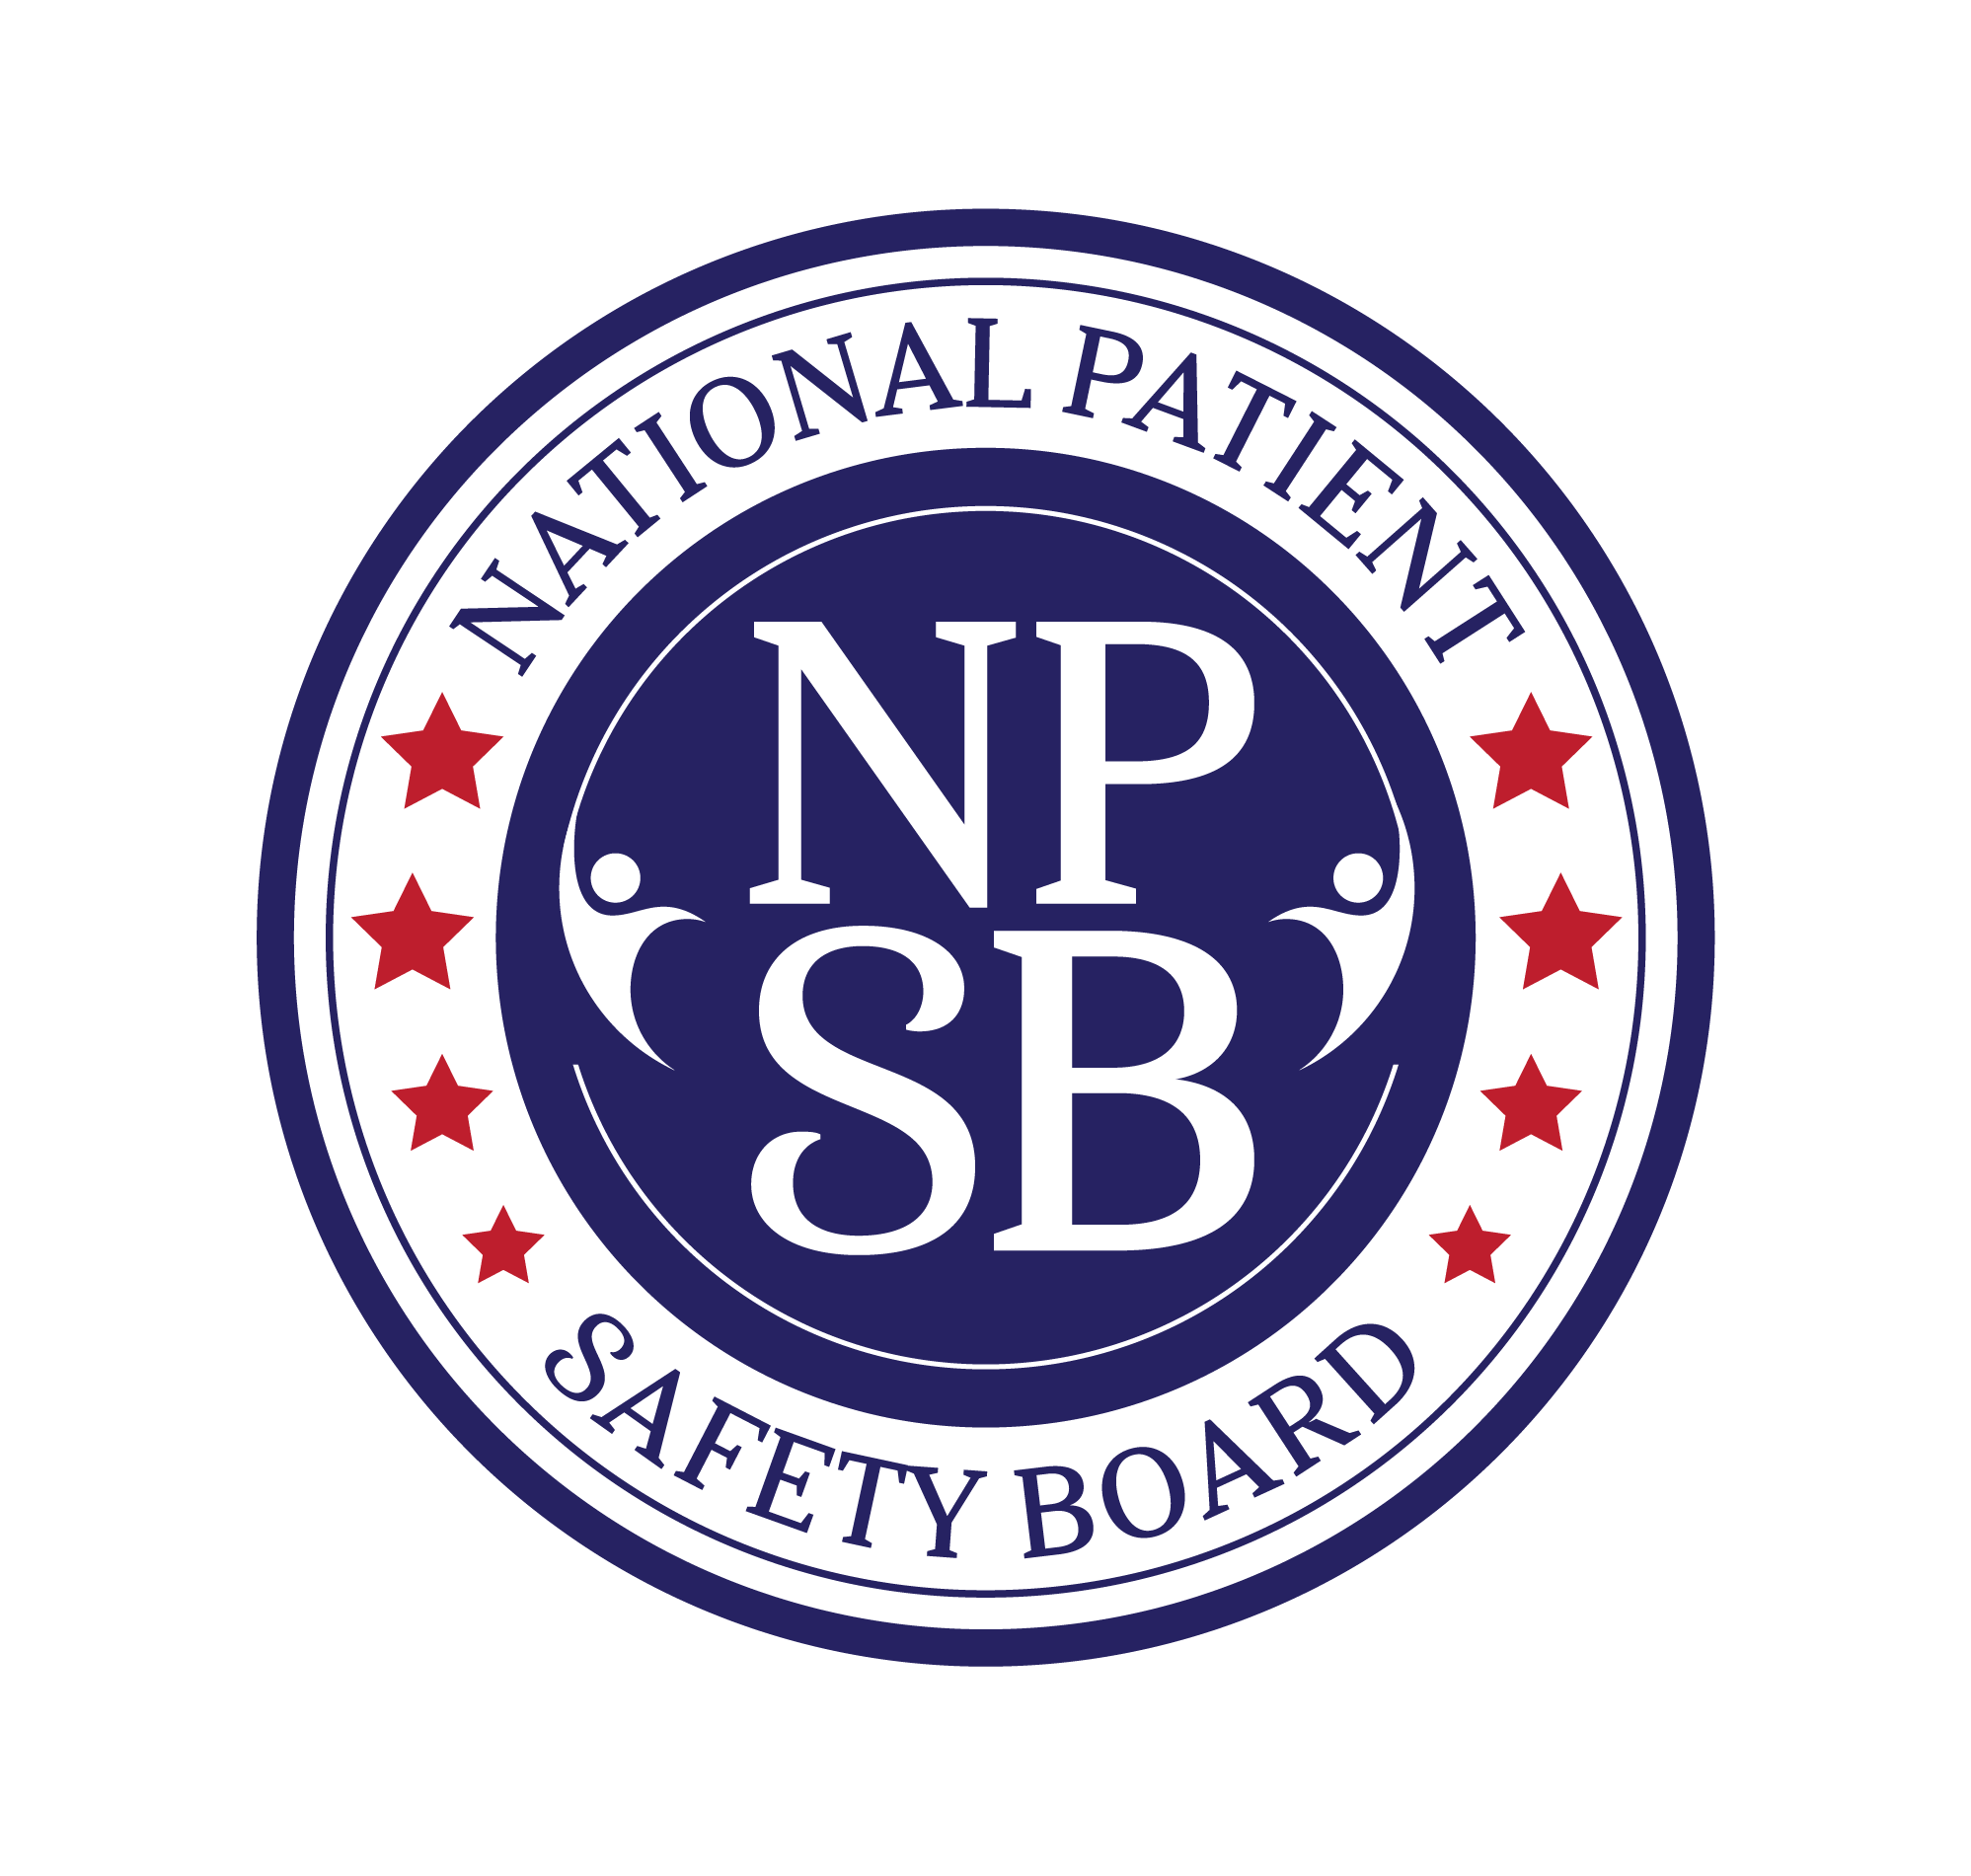 National Patient Safety Board Logo